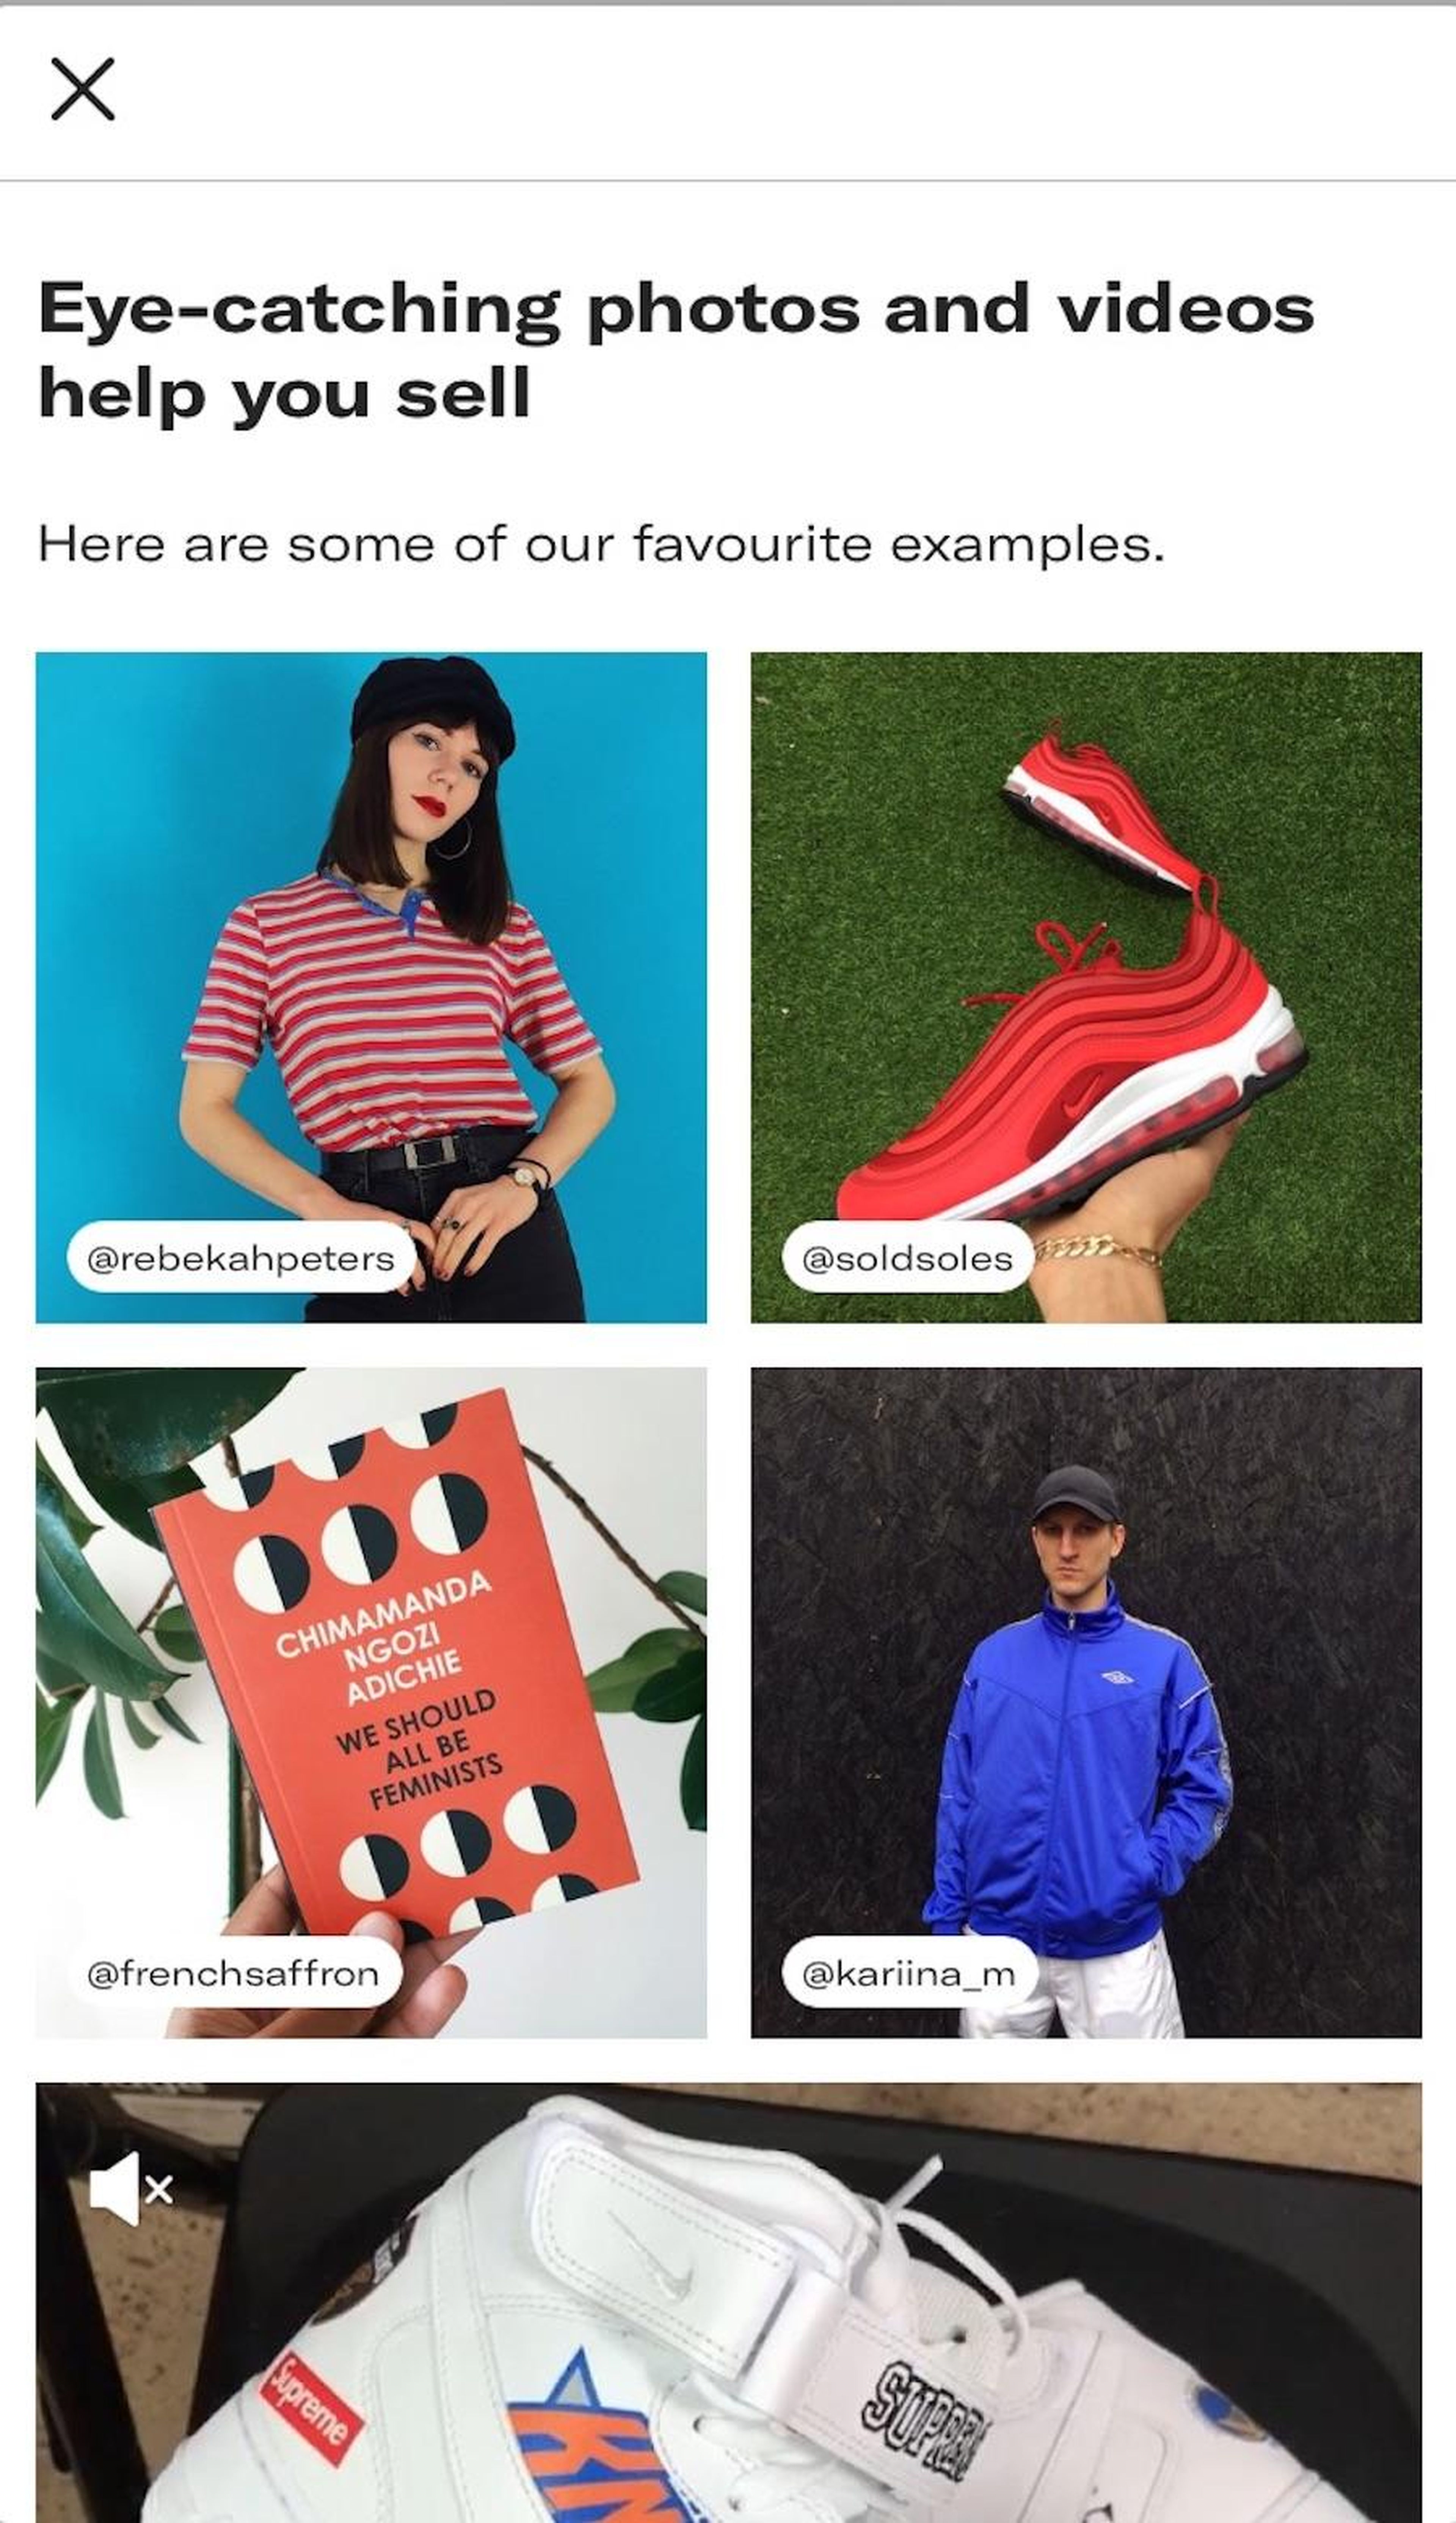 Depop advises sellers to post at least four photos and a video to give the item its best chance of selling.